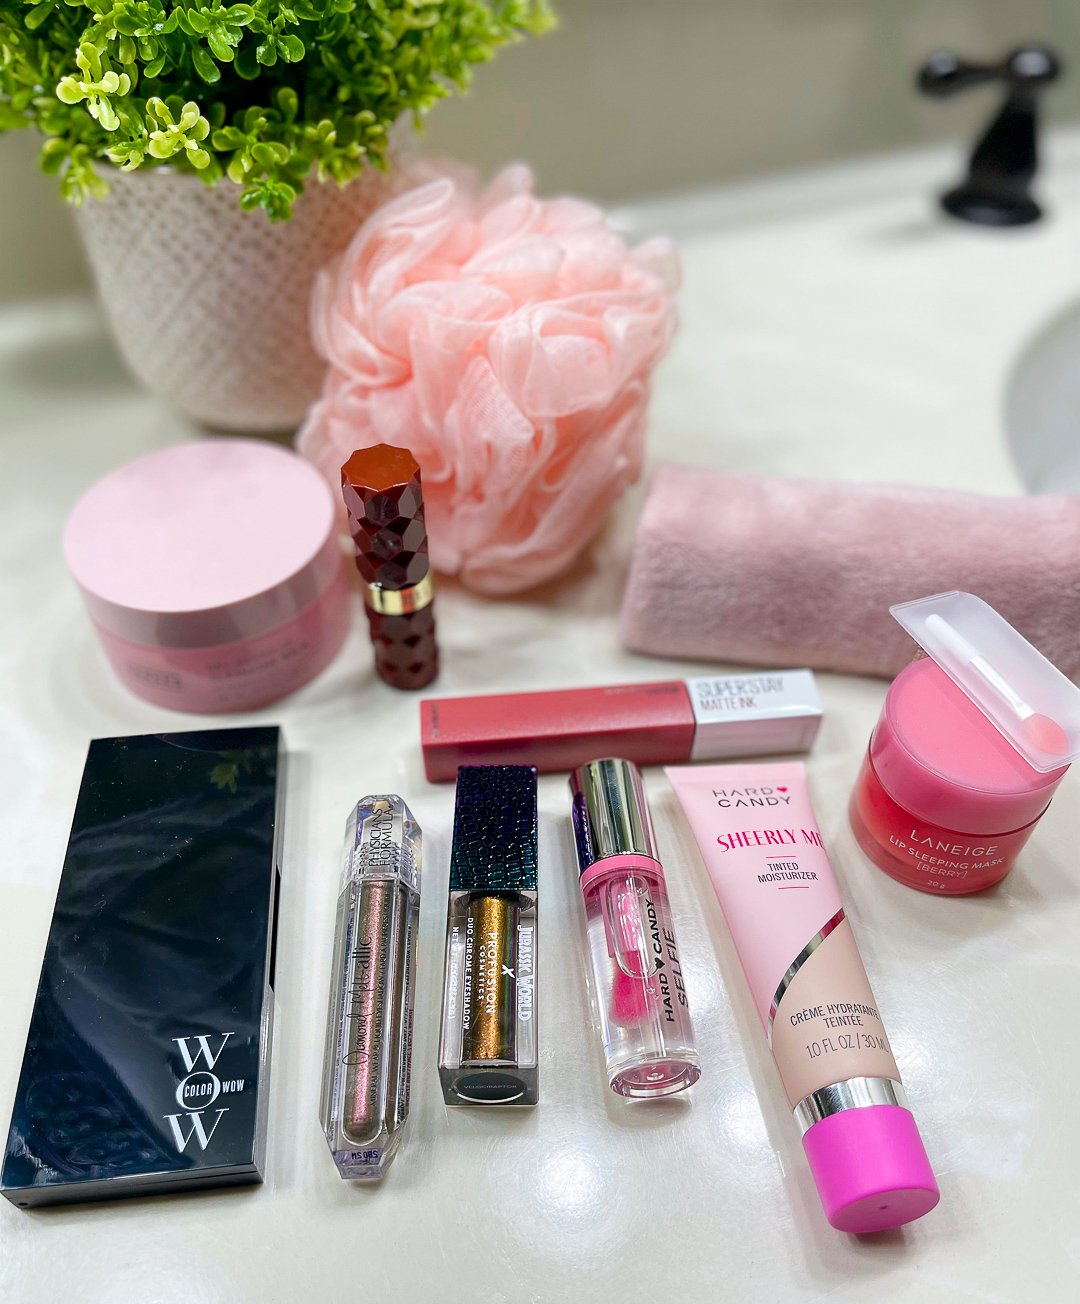 Over 40 Fashion Blogger, Tania Stephens is trying products from Walmart Beauty for August 2022 2